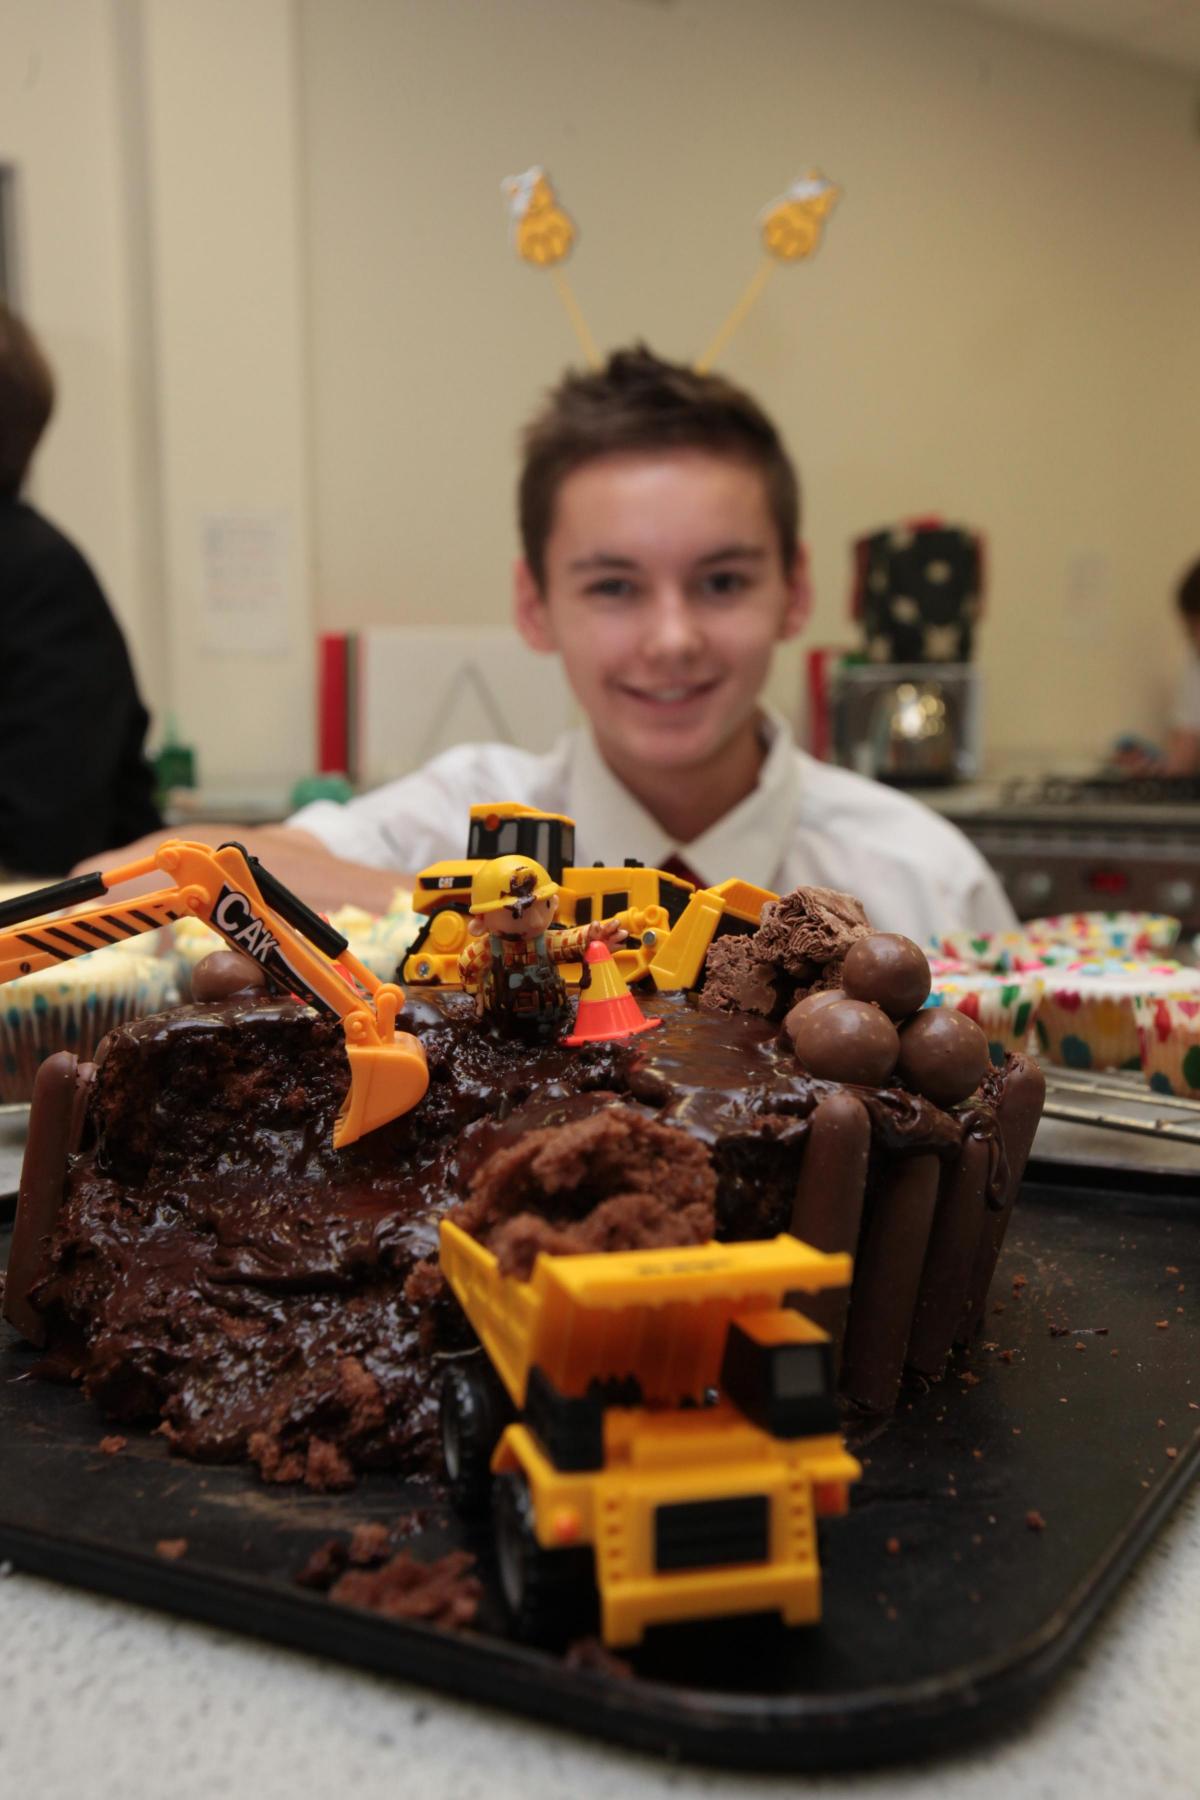 Children in Need 2014 - Bake Off at Oasis Academy